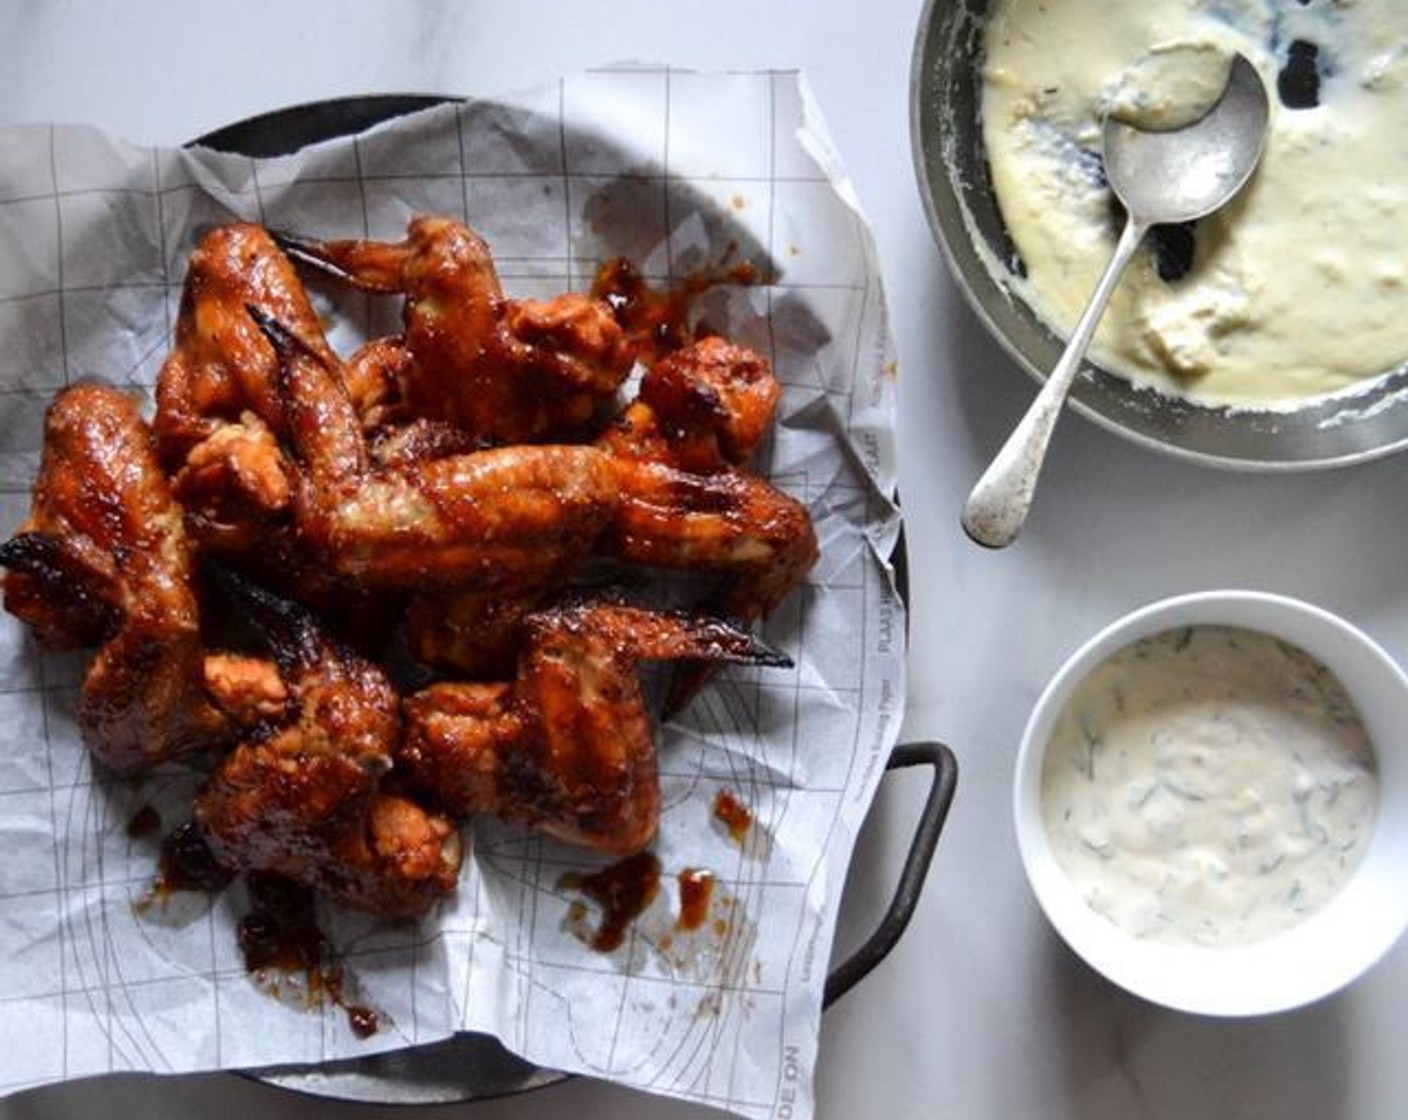 Hotwings with Blue Cheese Dipping Sauce